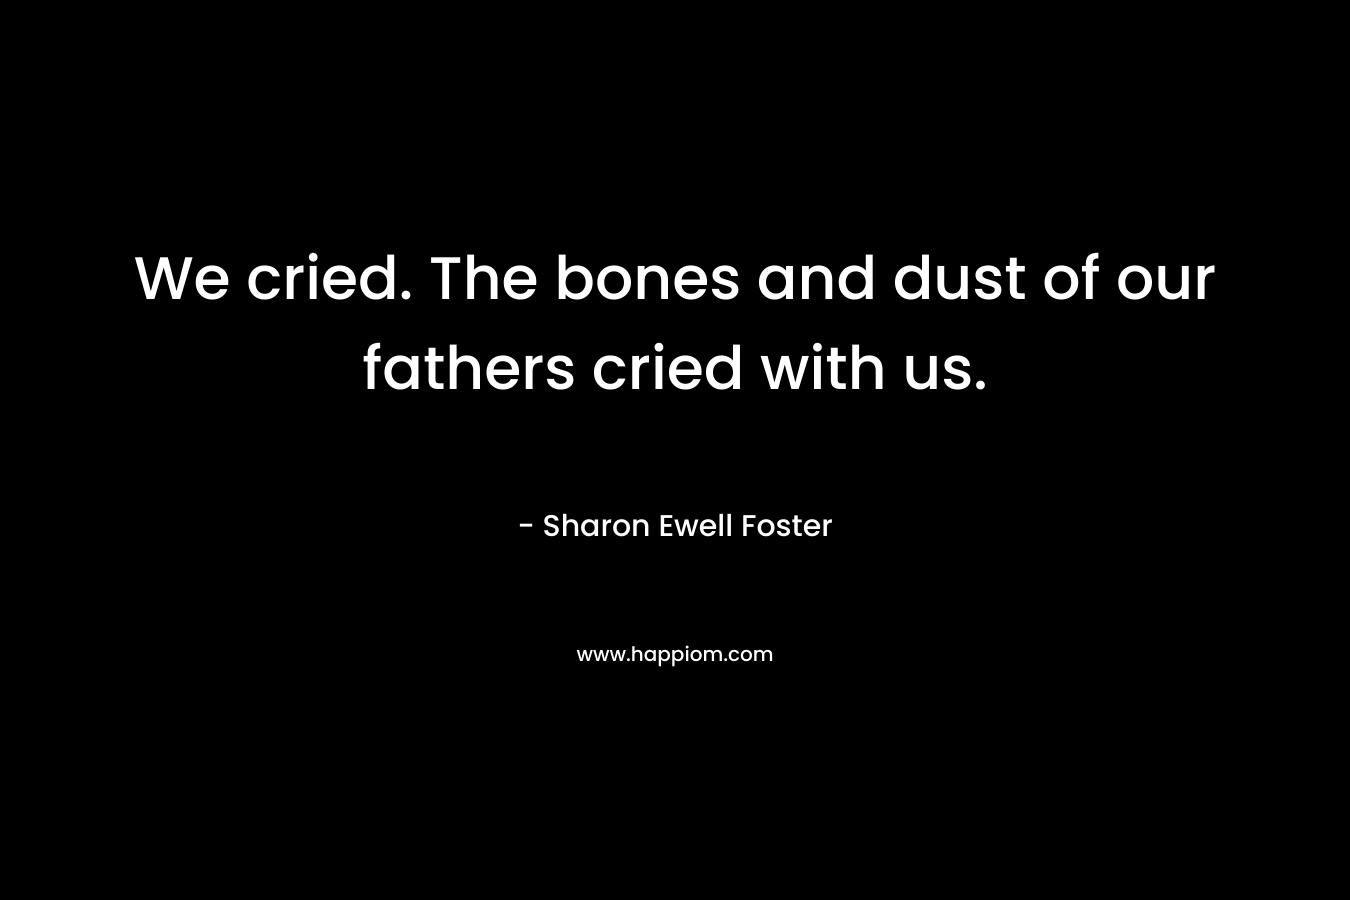 We cried. The bones and dust of our fathers cried with us.